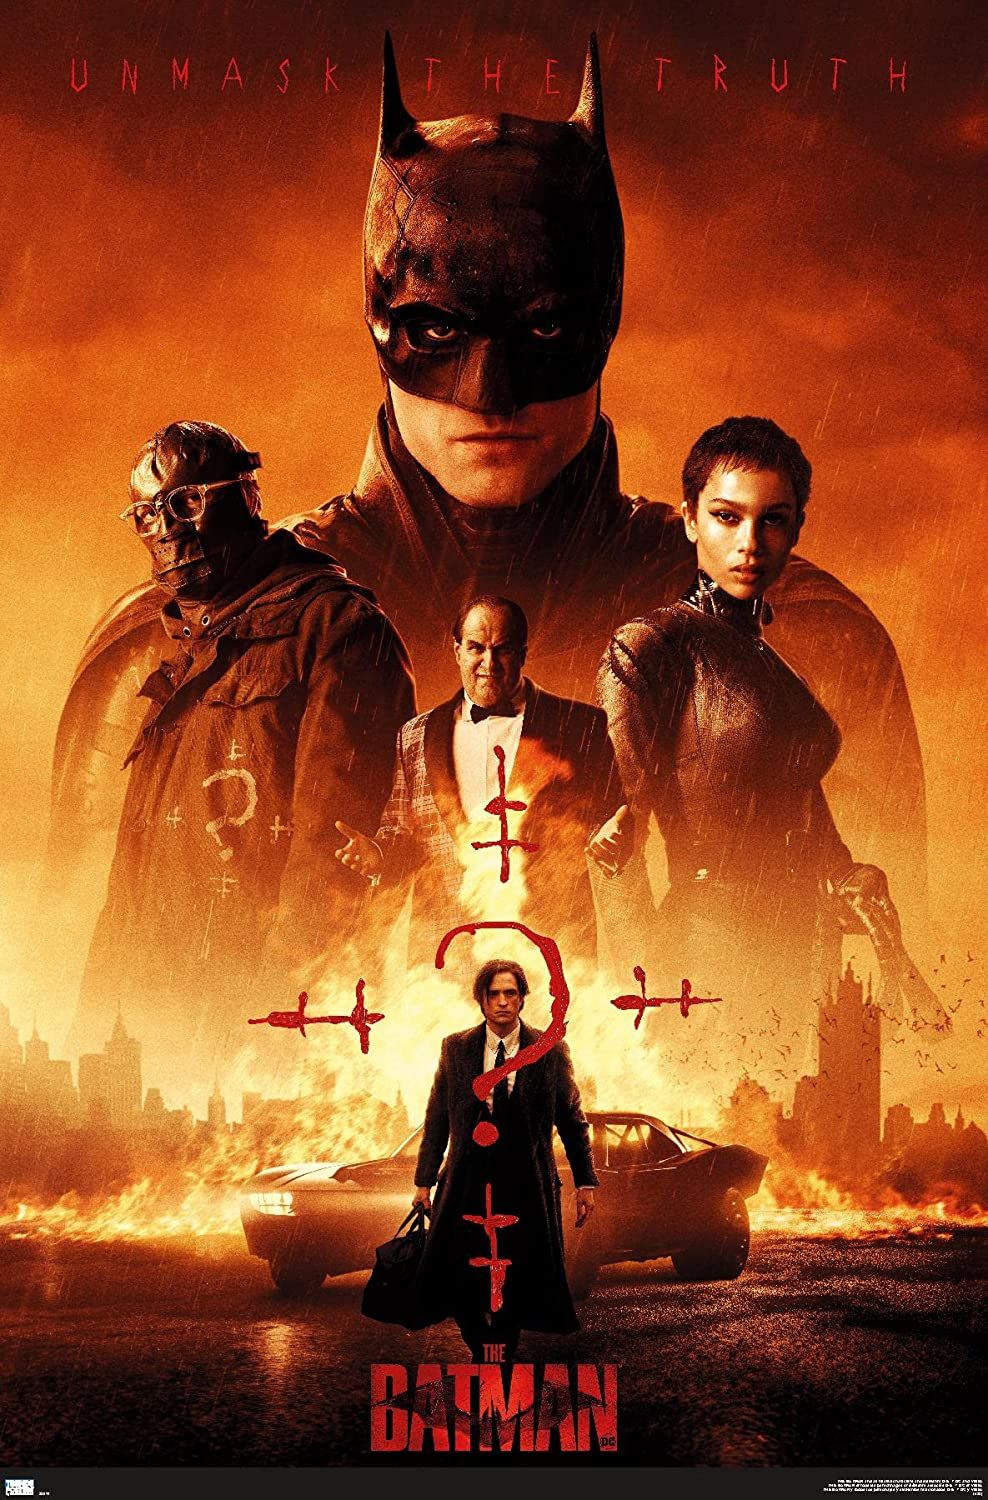 Batman, Riddler, Catwoman and the Penguin on the movie poster for The Batman (2022)